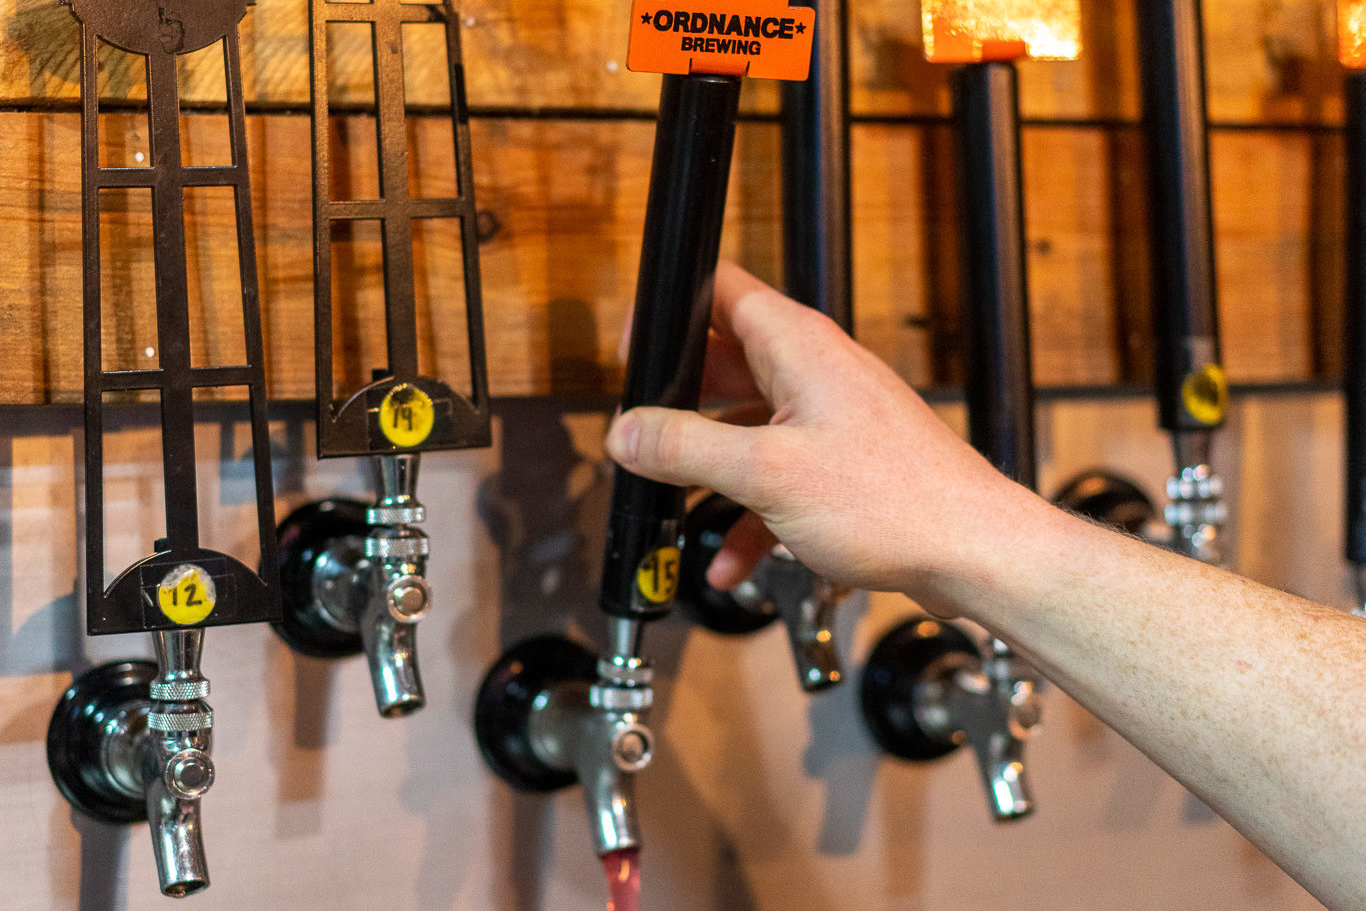 Man holding a beer tap at Ordnance Brewing